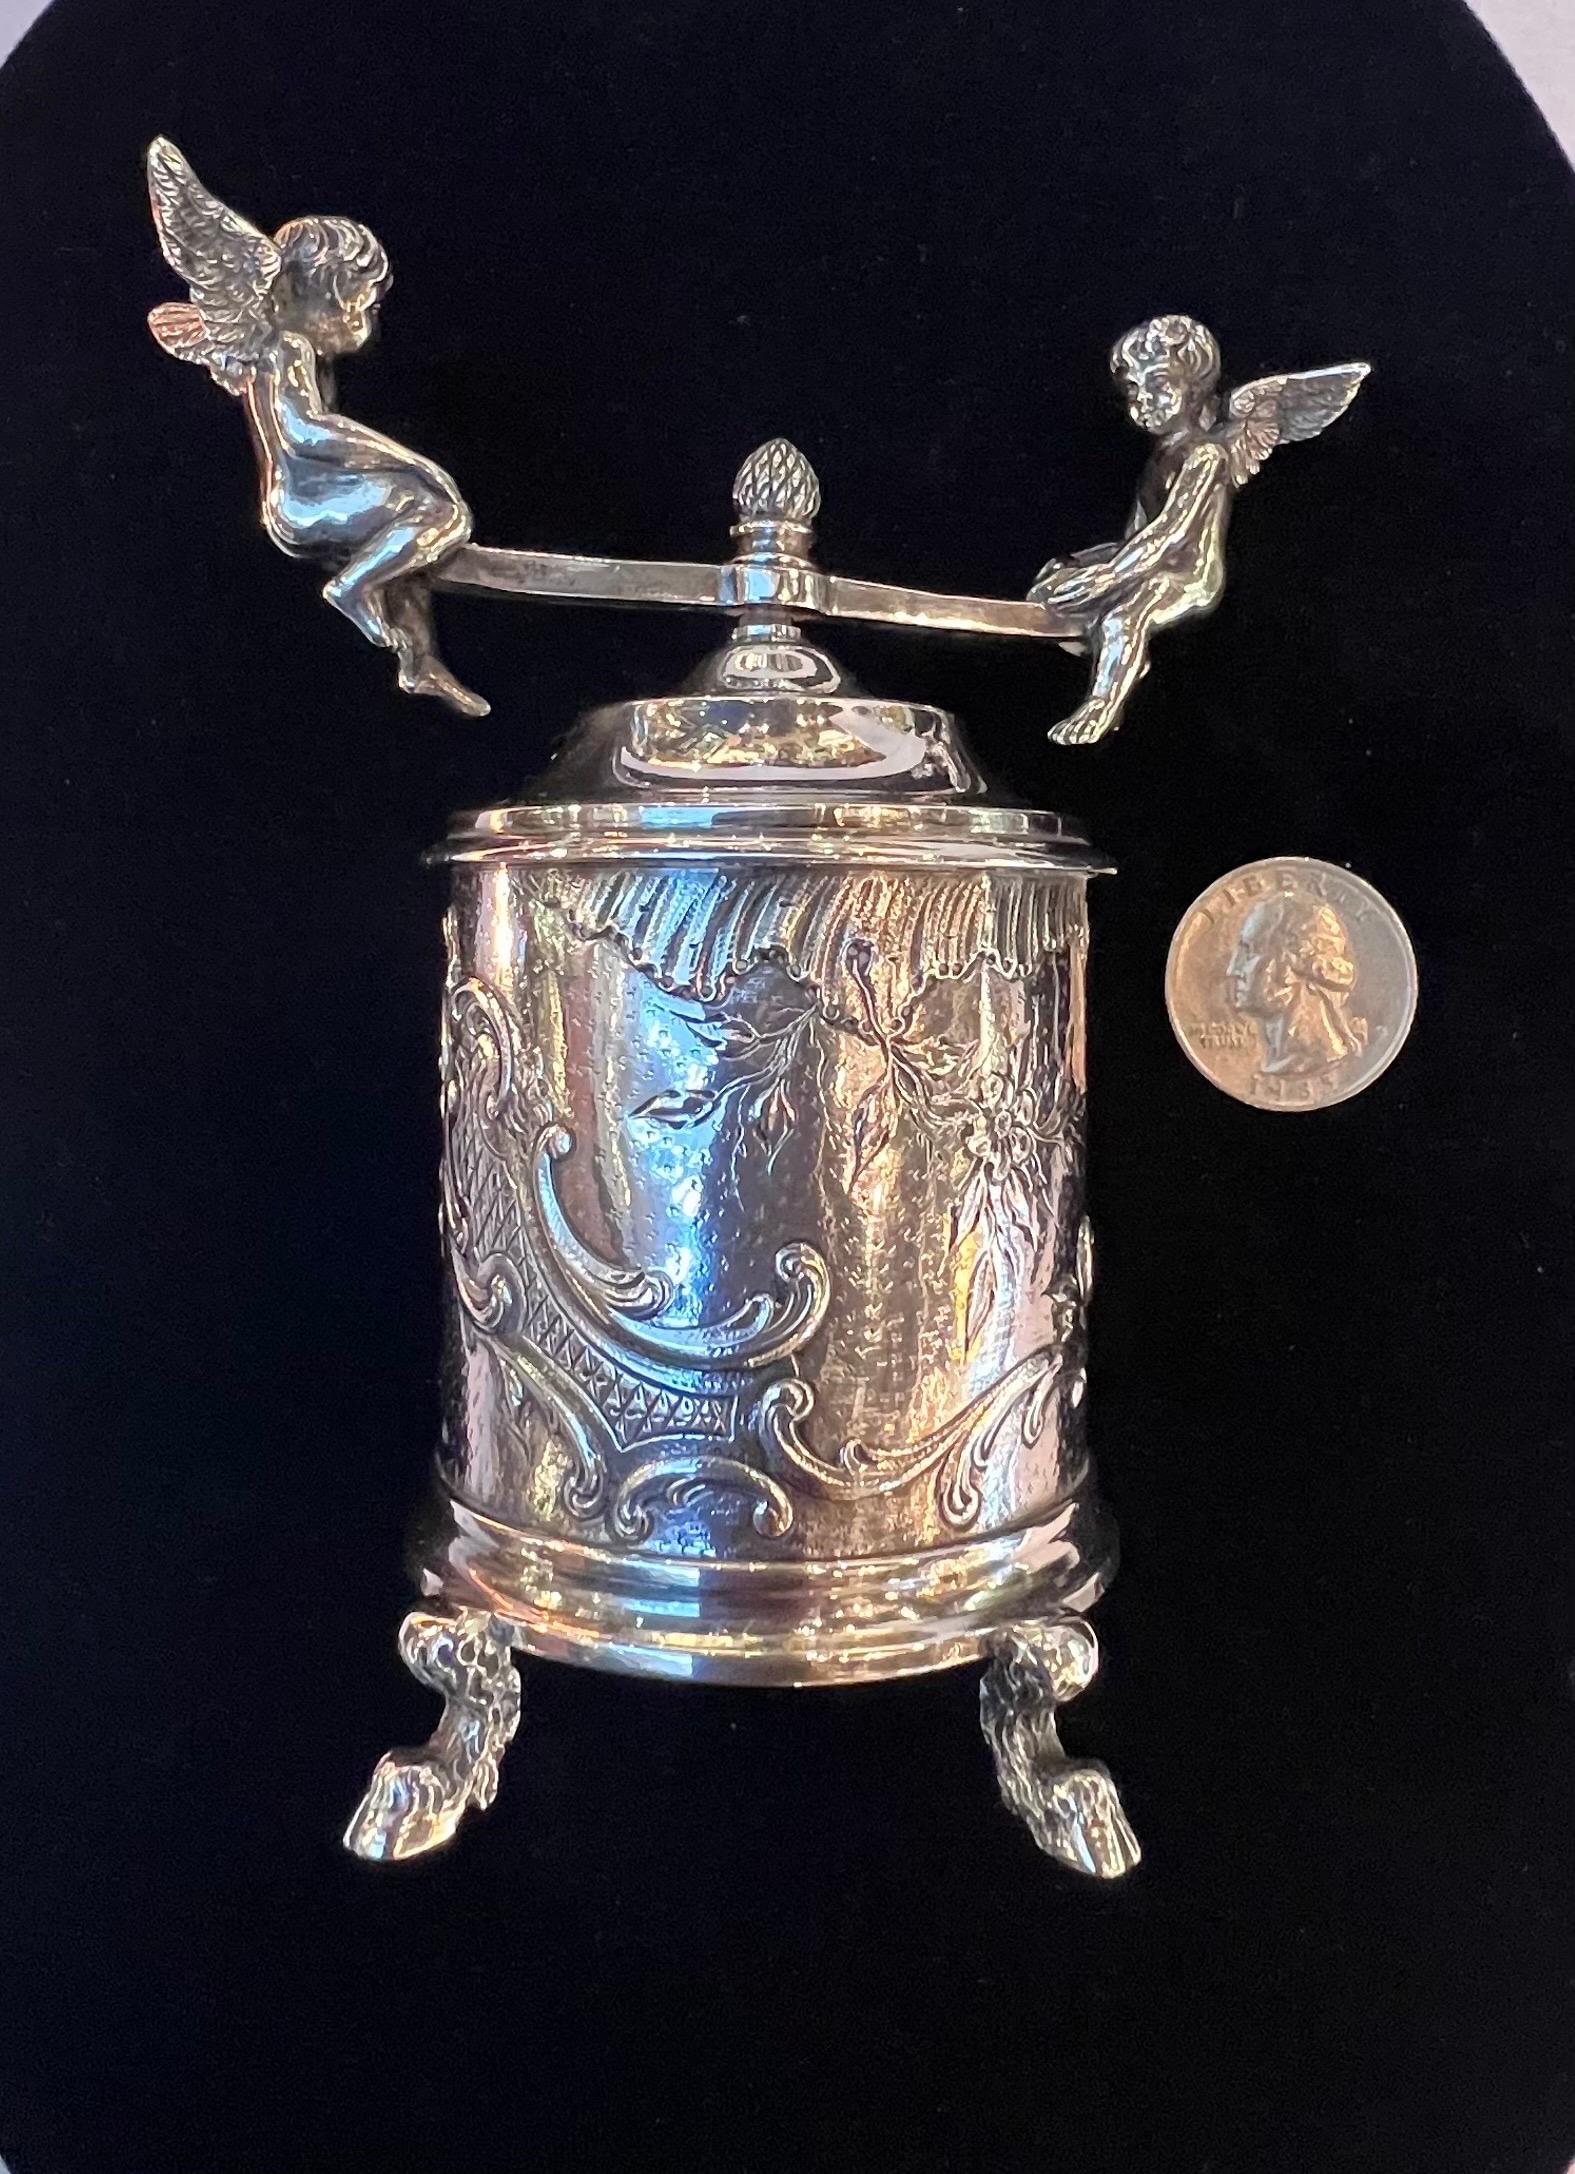 A French sterling silver Pepper Mill by Jean Granvigne, late 19th century. The mill depicting two winged putti and a repousse body resting of hoofed feet. The hallmarks at the bottom on lower side.